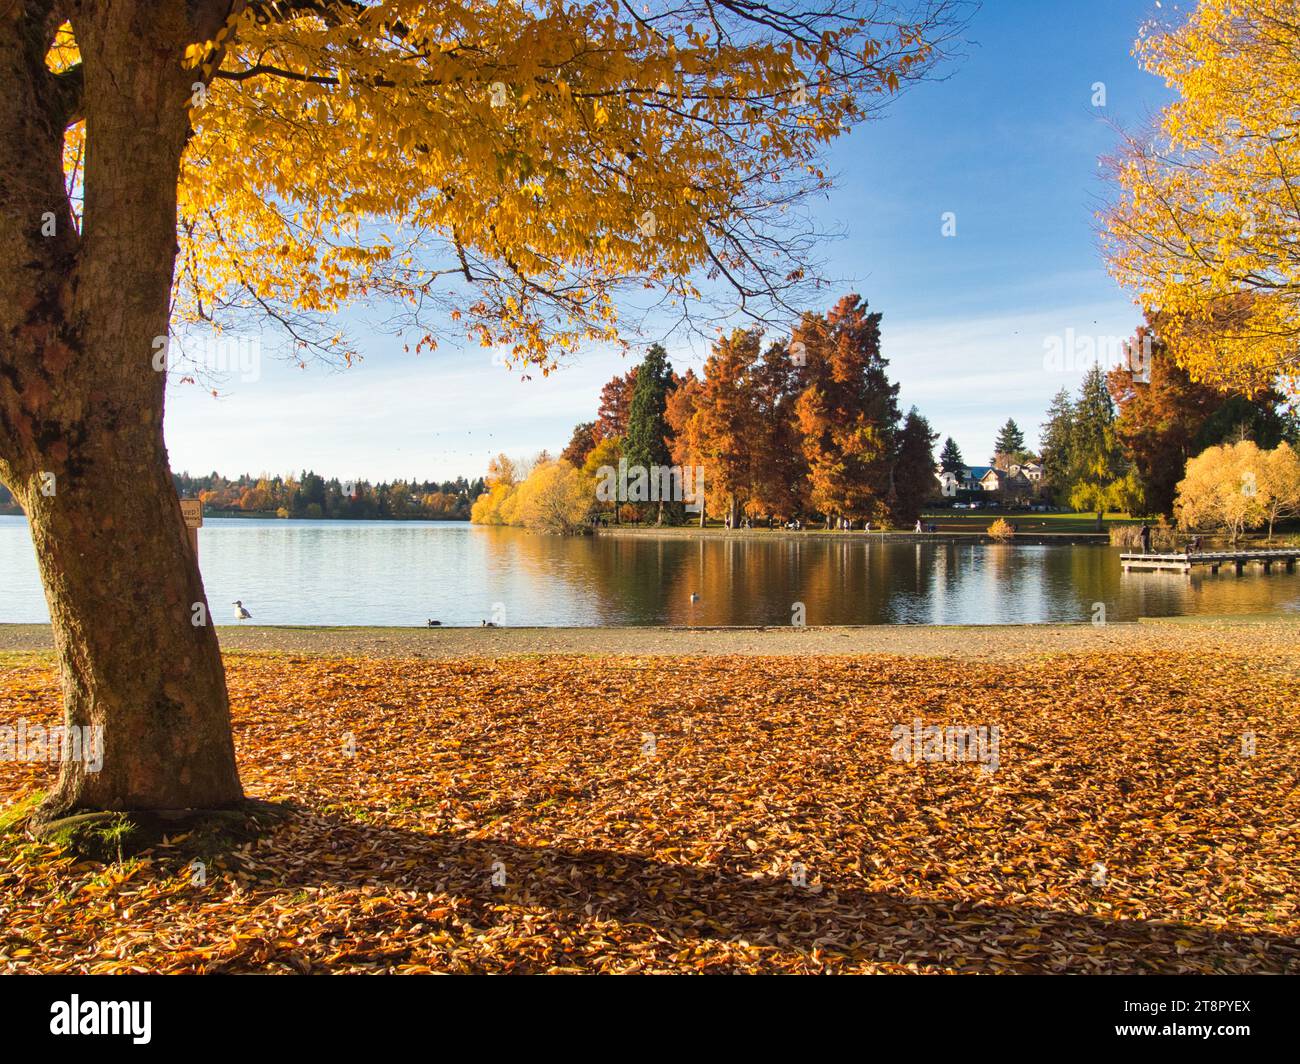 Landscape of tree in front of calm lake on sunny fall day in city park with beautiful autumn foliage at golden hour. Stock Photo